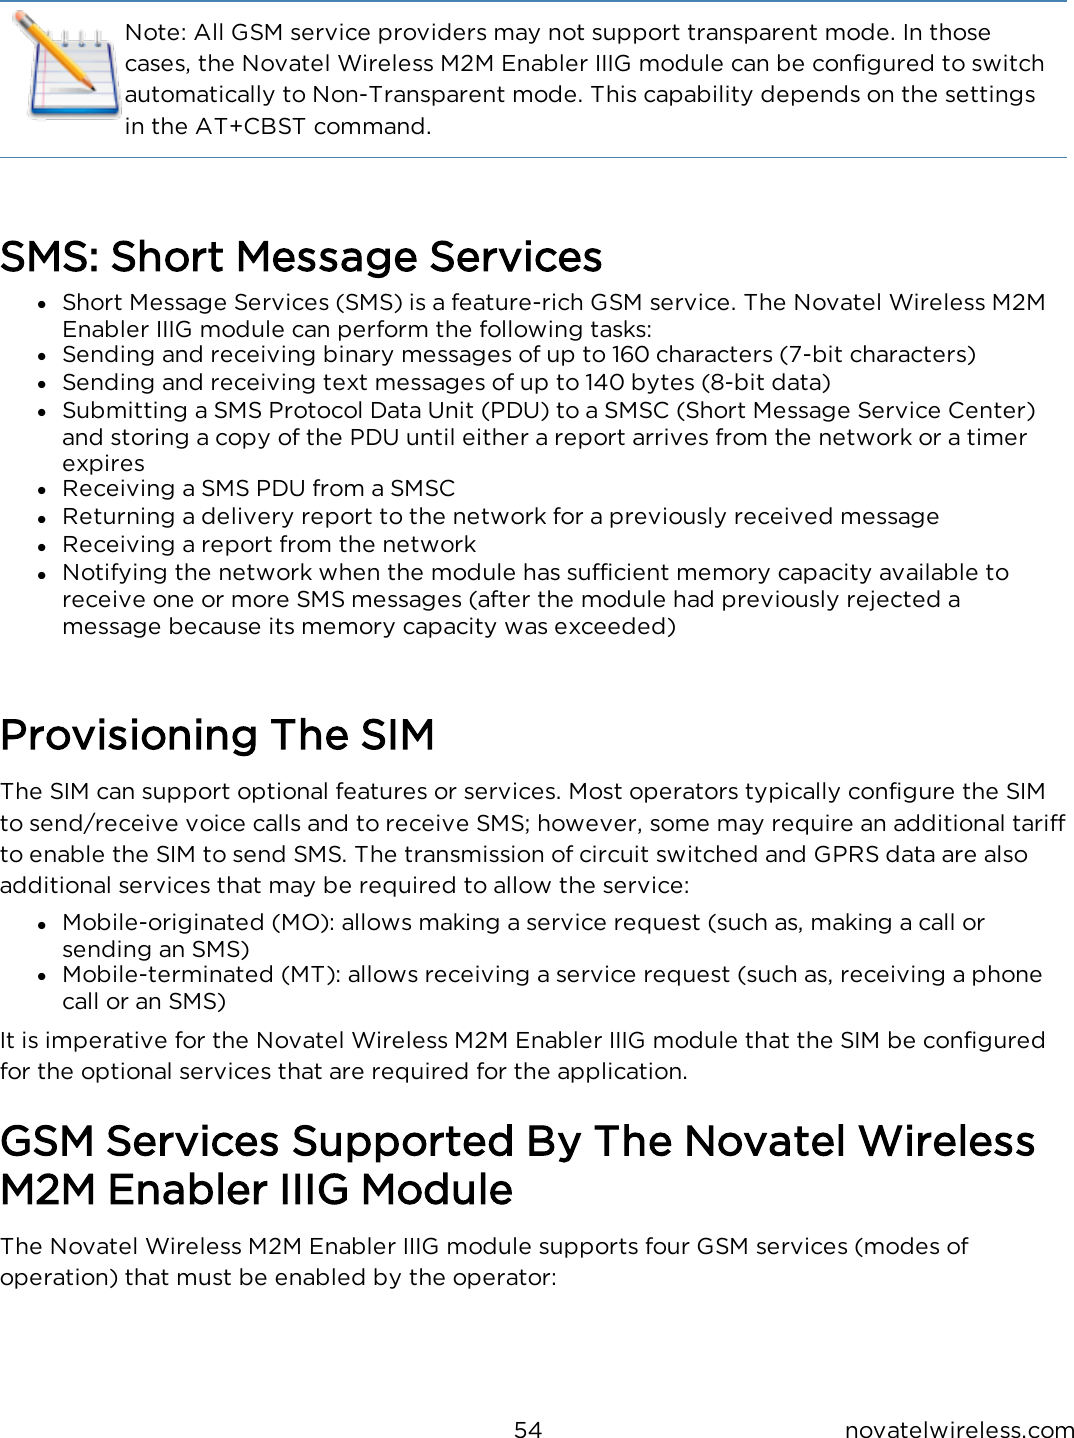 54 novatelwireless.comNote: All GSM service providers may not support transparent mode.  In those cases, the Novatel Wireless M2M Enabler IIIG module can be configured to switch automatically to Non-Transparent mode.  This capability depends on the settings in the AT+CBST command.SMS: Short Message Servicesl  Short Message Services (SMS) is a feature-rich GSM service.  The Novatel Wireless M2M Enabler IIIG module can perform the following tasks:l  Sending and receiving binary messages of up to 160 characters (7-bit characters)l  Sending and receiving text messages of up to 140 bytes (8-bit data)l  Submitting a SMS Protocol Data Unit (PDU) to a SMSC (Short Message Service Center) and storing a copy of the PDU until either a report arrives from the network or a timer expiresl  Receiving a SMS PDU from a SMSCl  Returning a delivery report to the network for a previously received messagel  Receiving a report from the networkl  Notifying the network when the module has sufficient memory capacity available to receive one or more SMS messages (after the module had previously rejected a message because its memory capacity was exceeded)Provisioning The SIMThe SIM can support optional features or services.  Most operators typically configure the SIM to send/receive voice calls and to receive SMS; however, some may require an additional tariff to enable the SIM to send SMS.  The transmission of circuit switched and GPRS data are also additional services that may be required to allow the service:l  Mobile-originated (MO): allows making a service request (such as, making a call or sending an SMS)l  Mobile-terminated (MT): allows receiving a service request (such as, receiving a phone call or an SMS)It is imperative for the Novatel Wireless M2M Enabler IIIG module that the SIM be configured for the optional services that are required for the application.GSM Services Supported By The Novatel Wireless M2M Enabler IIIG ModuleThe Novatel Wireless M2M Enabler IIIG module supports four GSM services (modes of operation) that must be enabled by the operator: